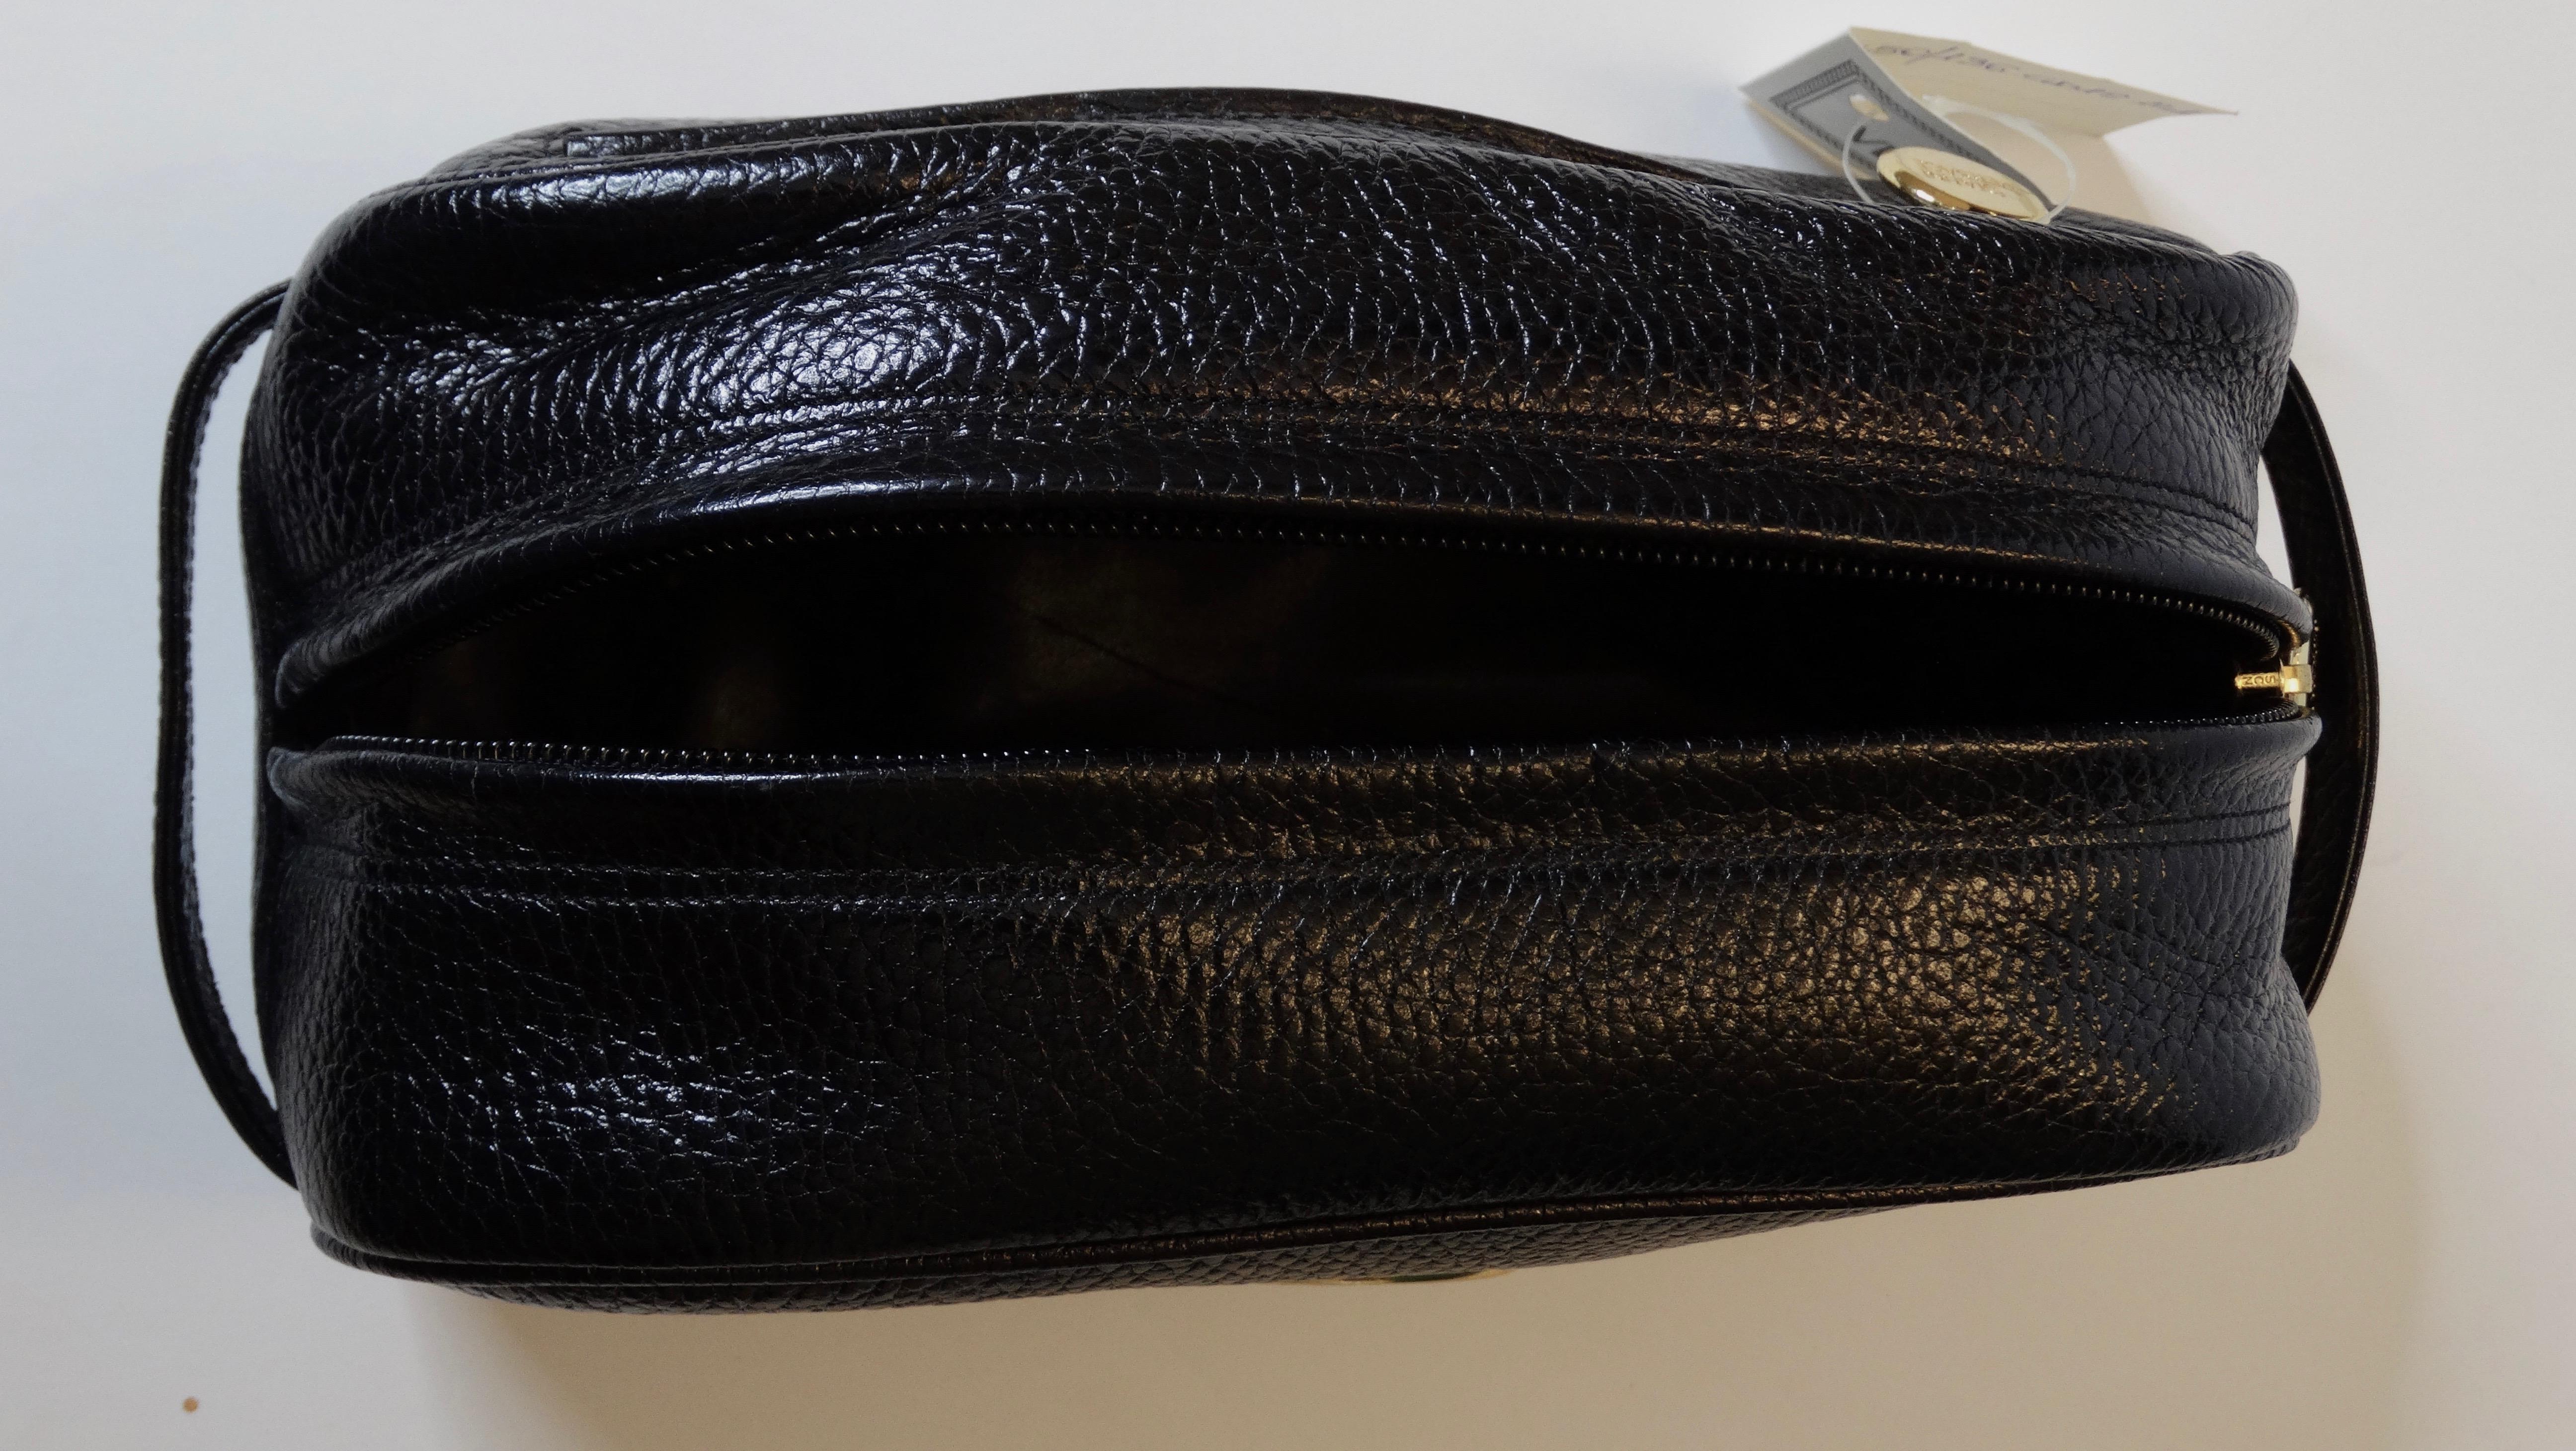 Gianni Versace 1990s Black Leather Cosmetic Bag 2